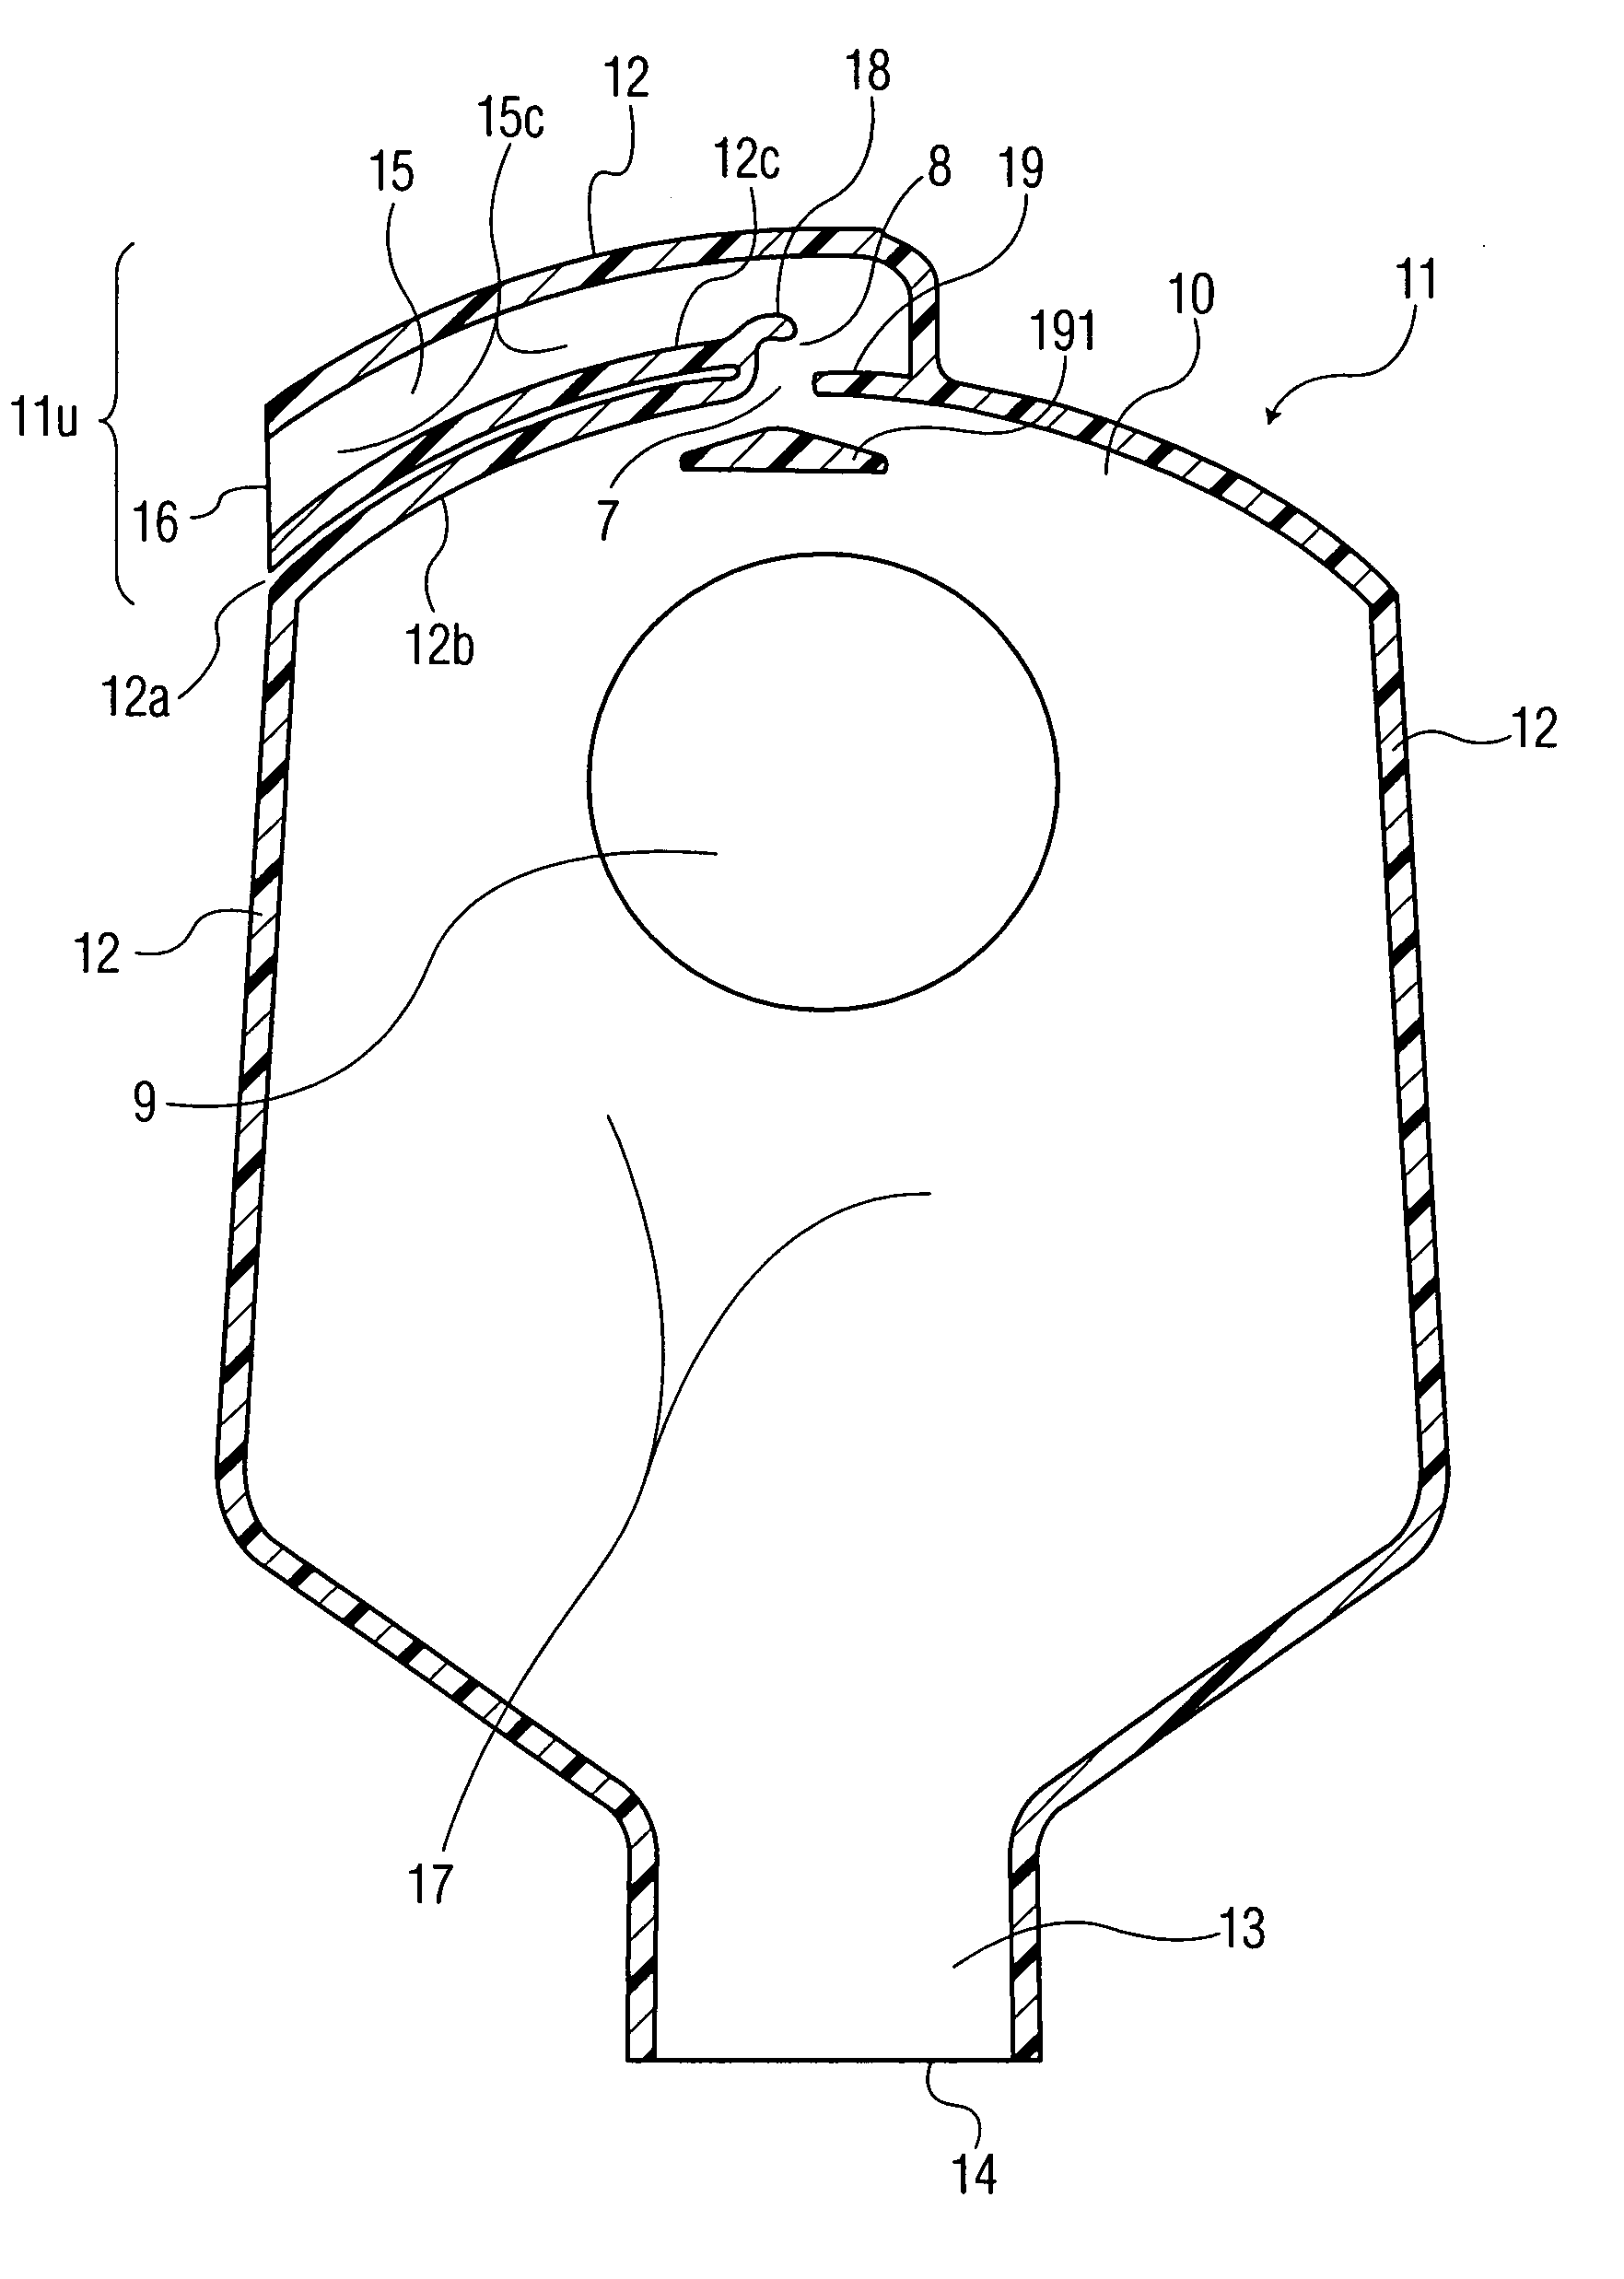 Ostomy tools, and systems and processes for their use